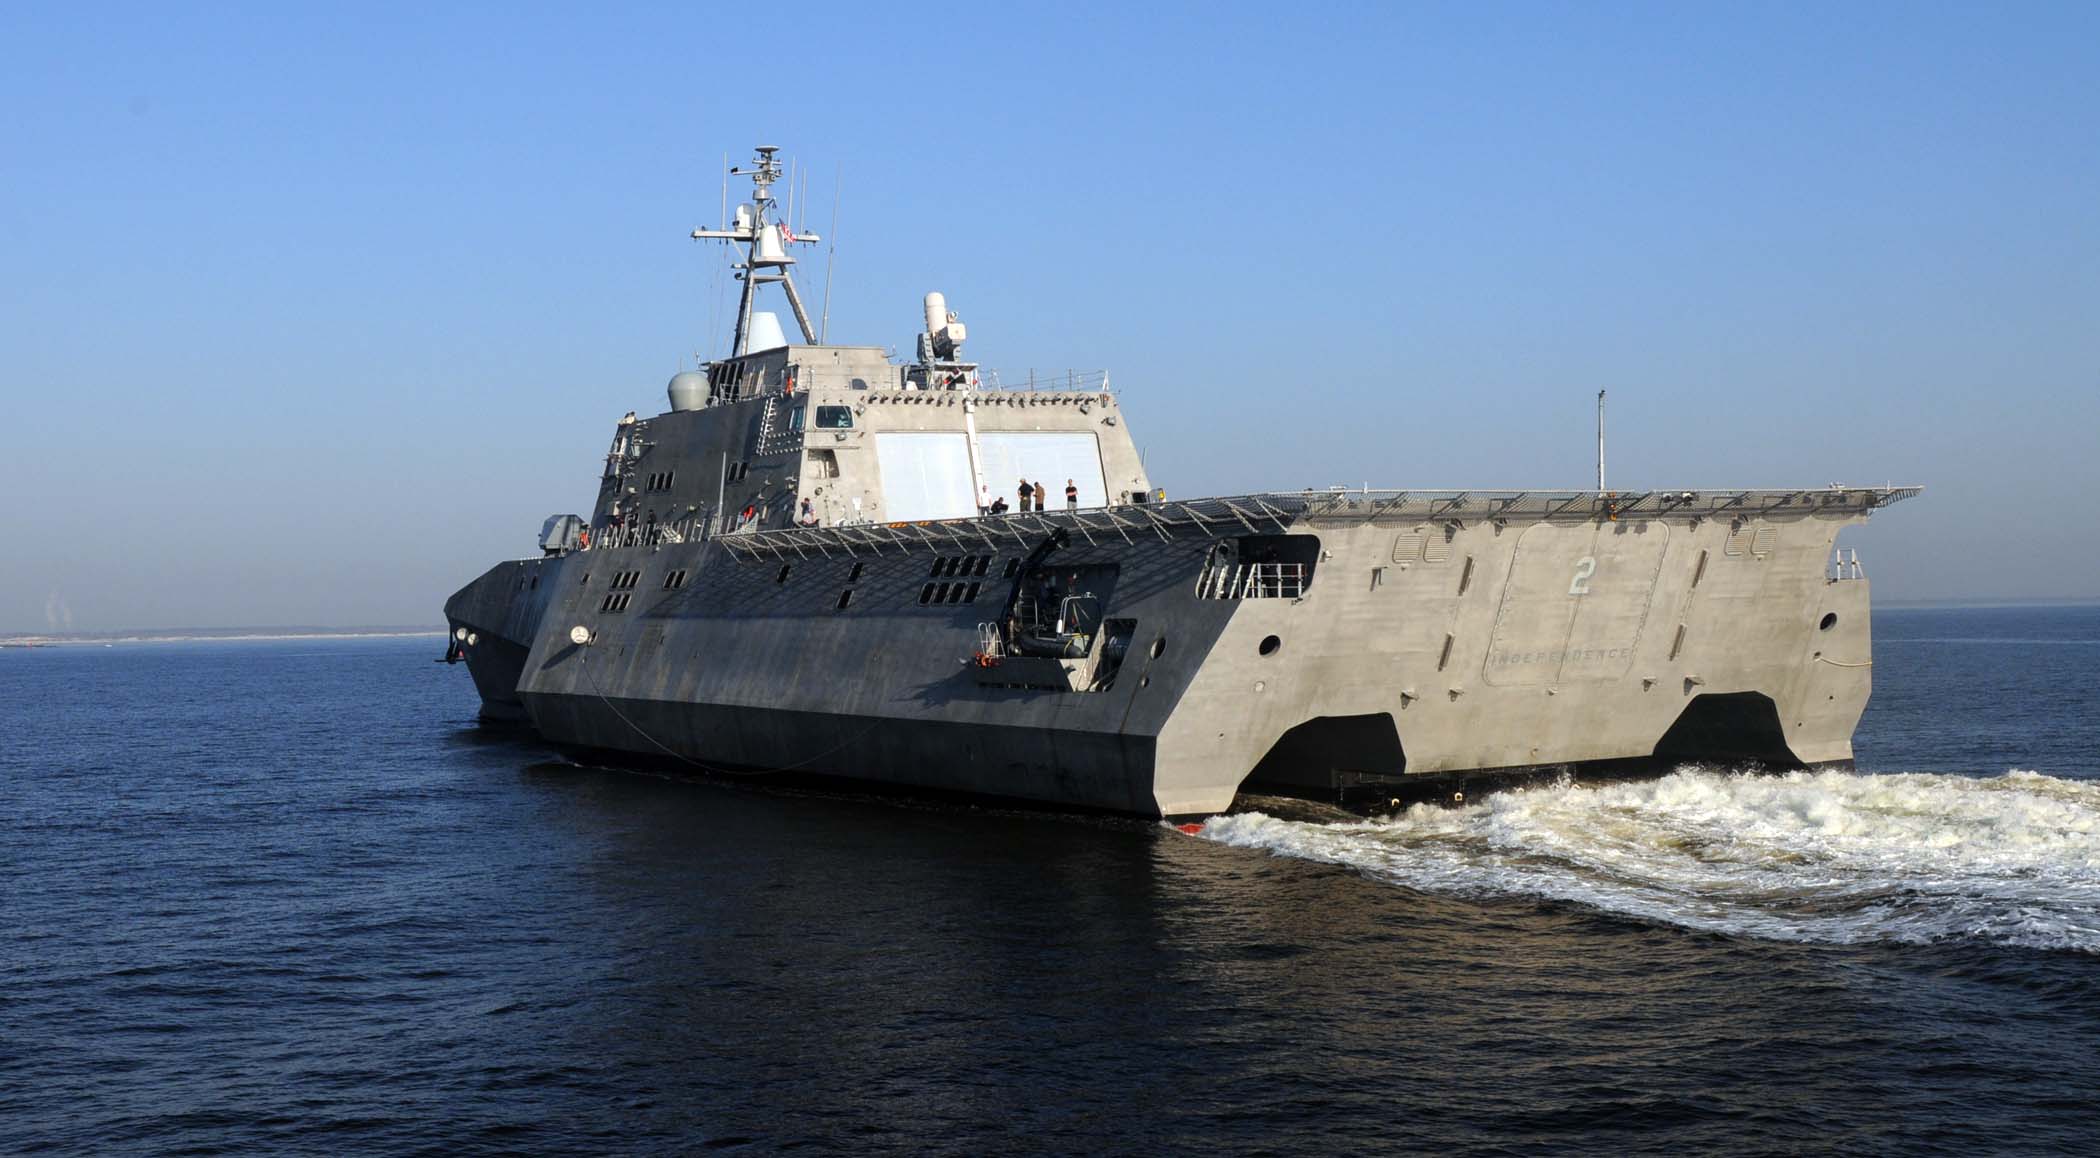 US_Navy_100402-N-7653W-102_The_Littoral_combat_ship_USS_Independence_(LCS_2)_approaches_Mayport,_Fla.jpg